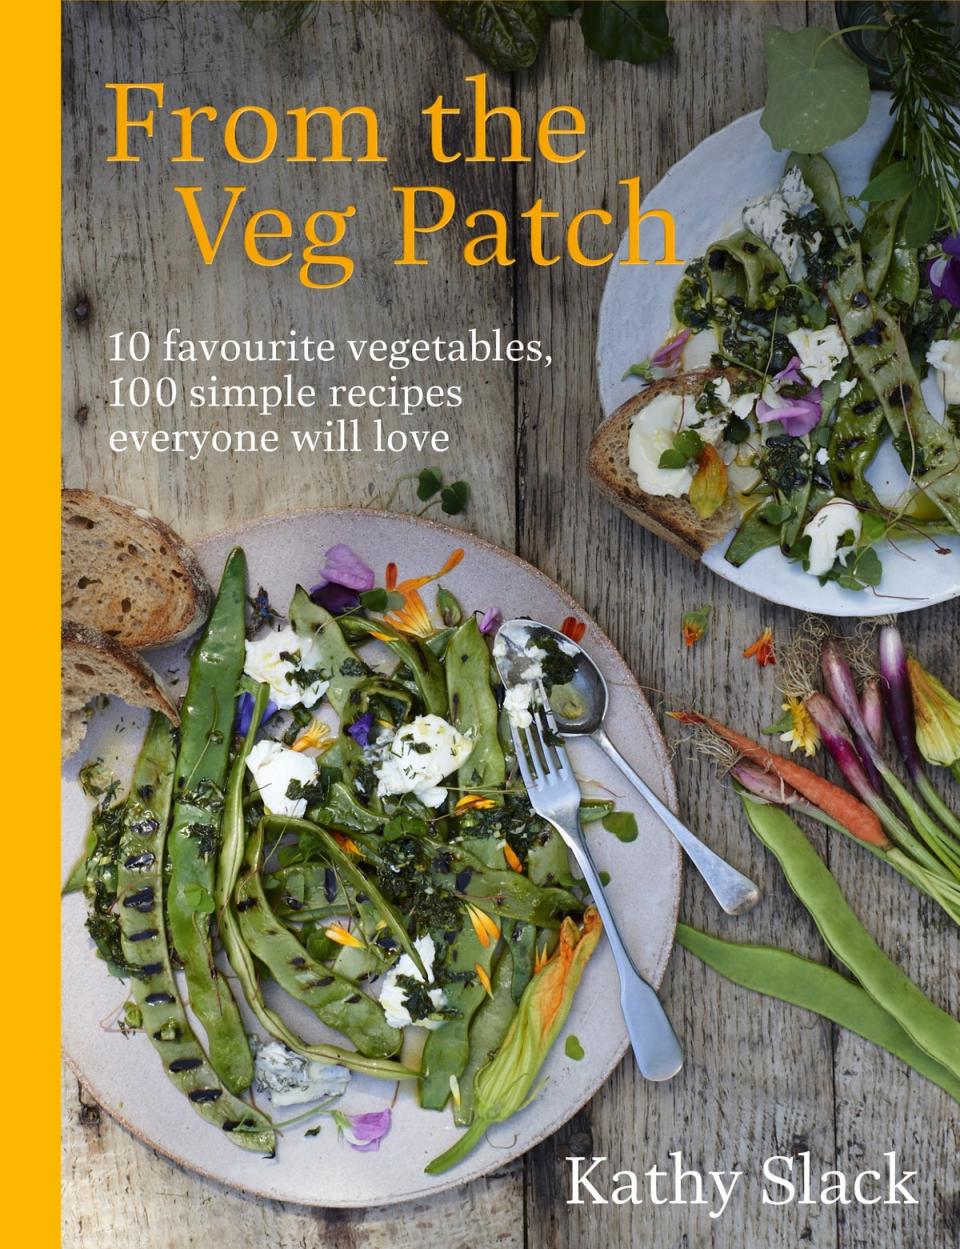 ‘From the Veg Patch’ was shortlisted for a Guild of Food Writers award this year (Ebury Press)